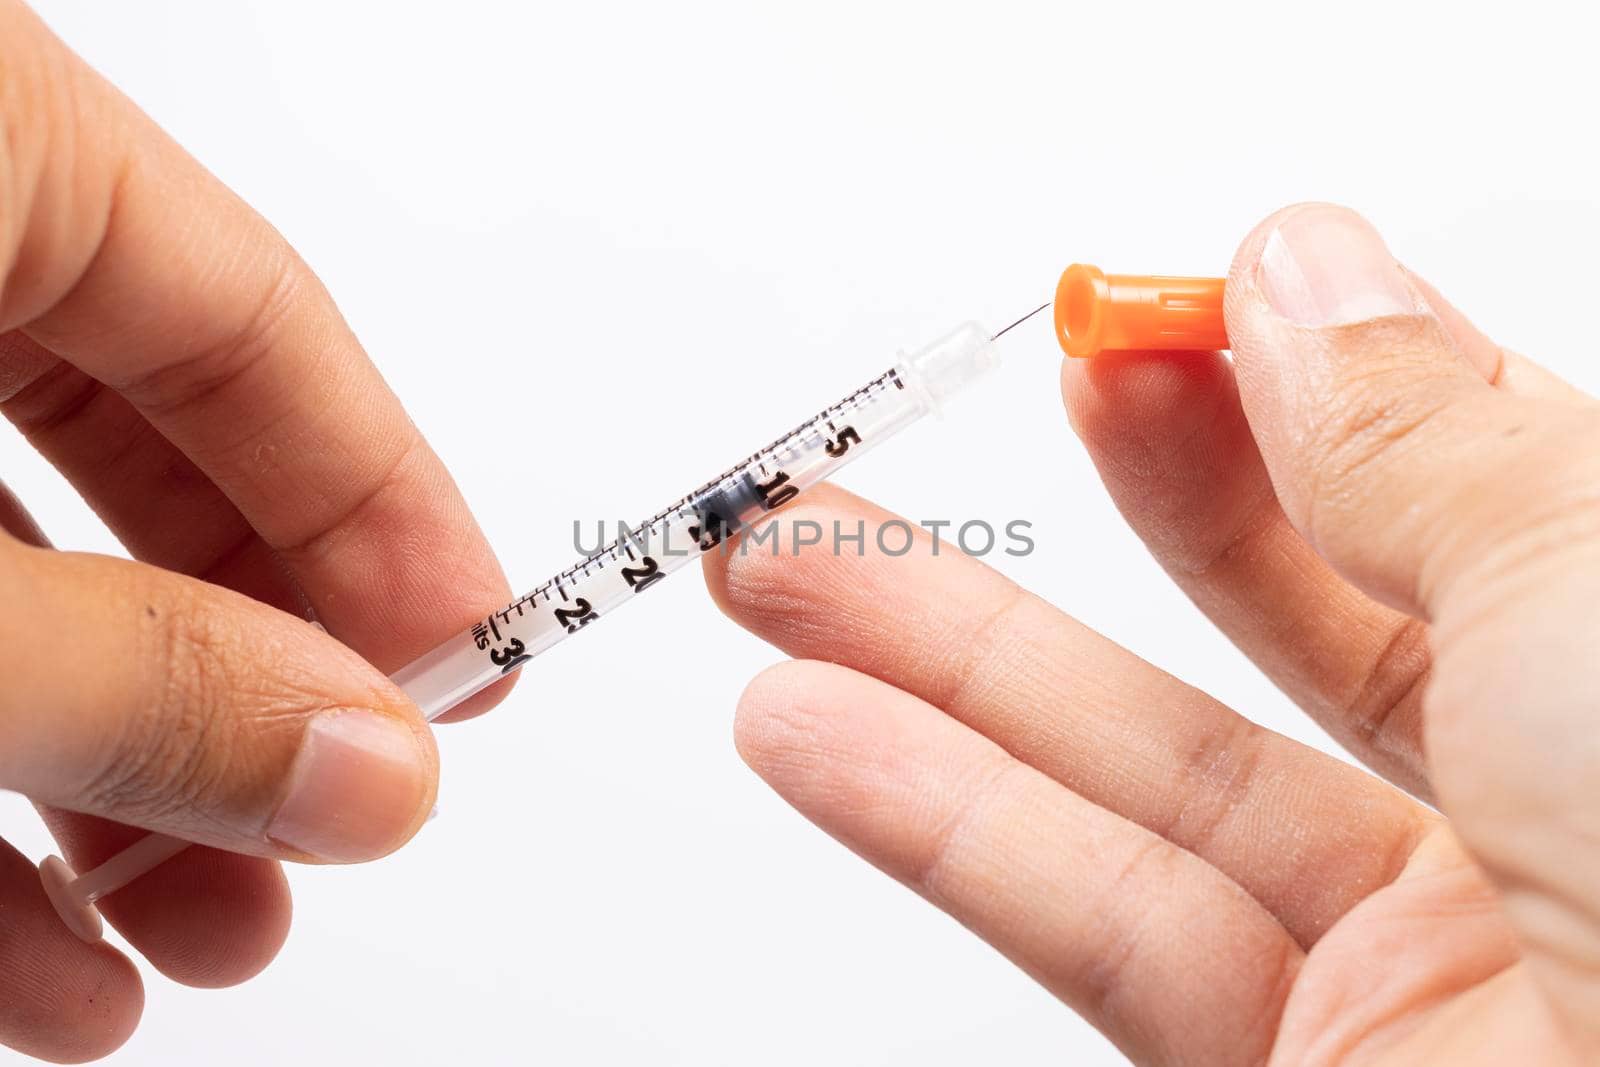 Hand holding an insulin syringe before being used